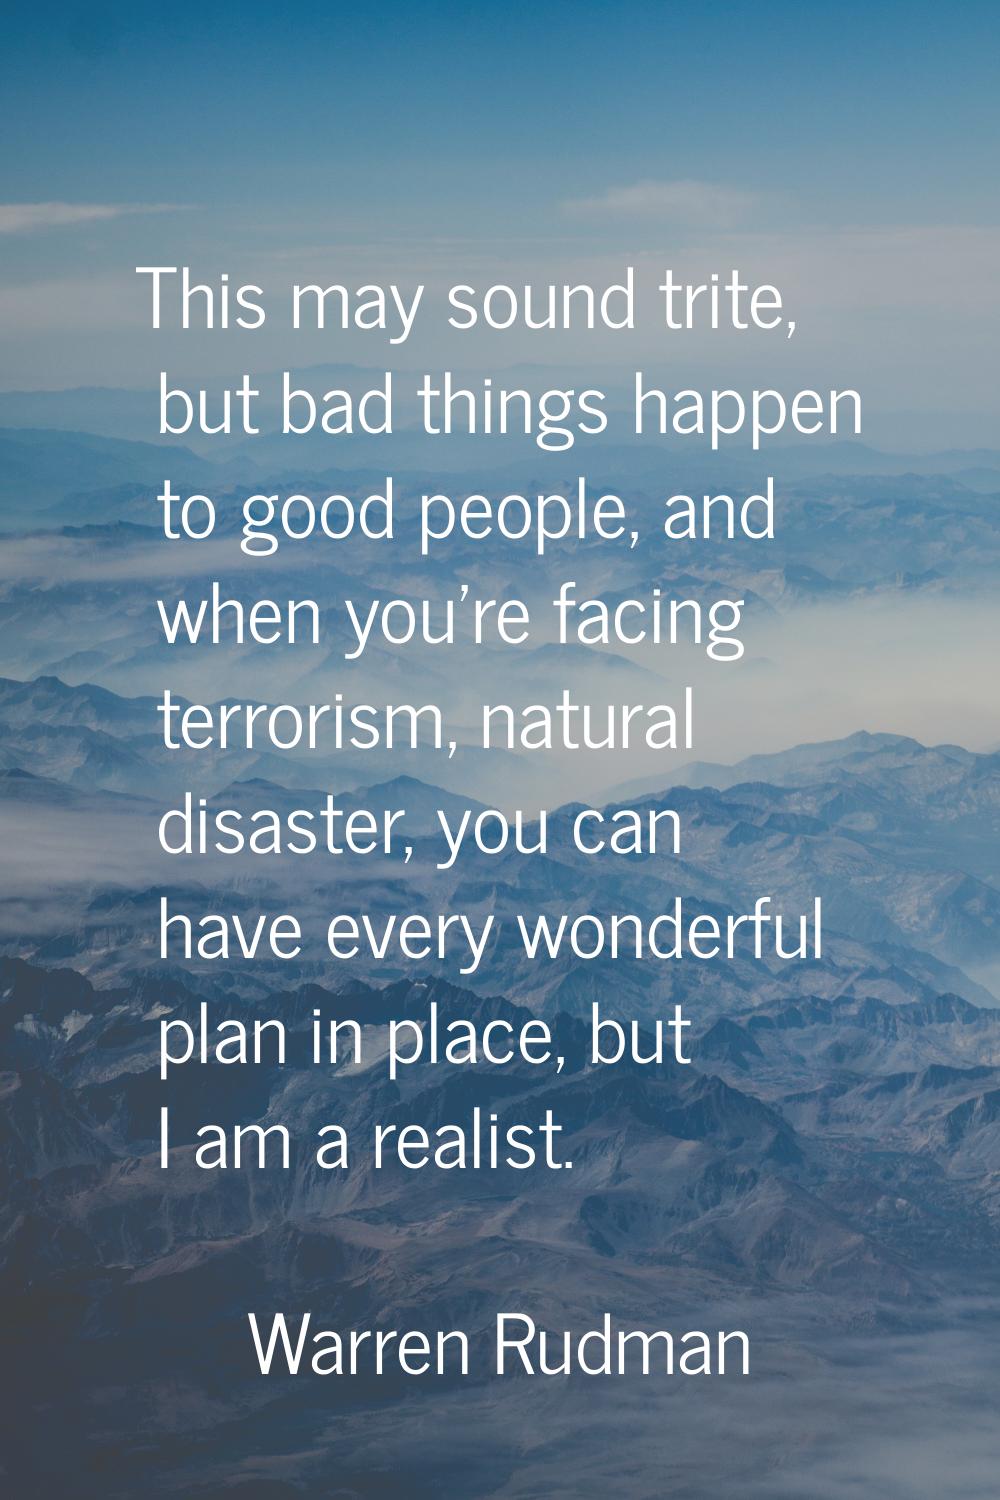 This may sound trite, but bad things happen to good people, and when you're facing terrorism, natur